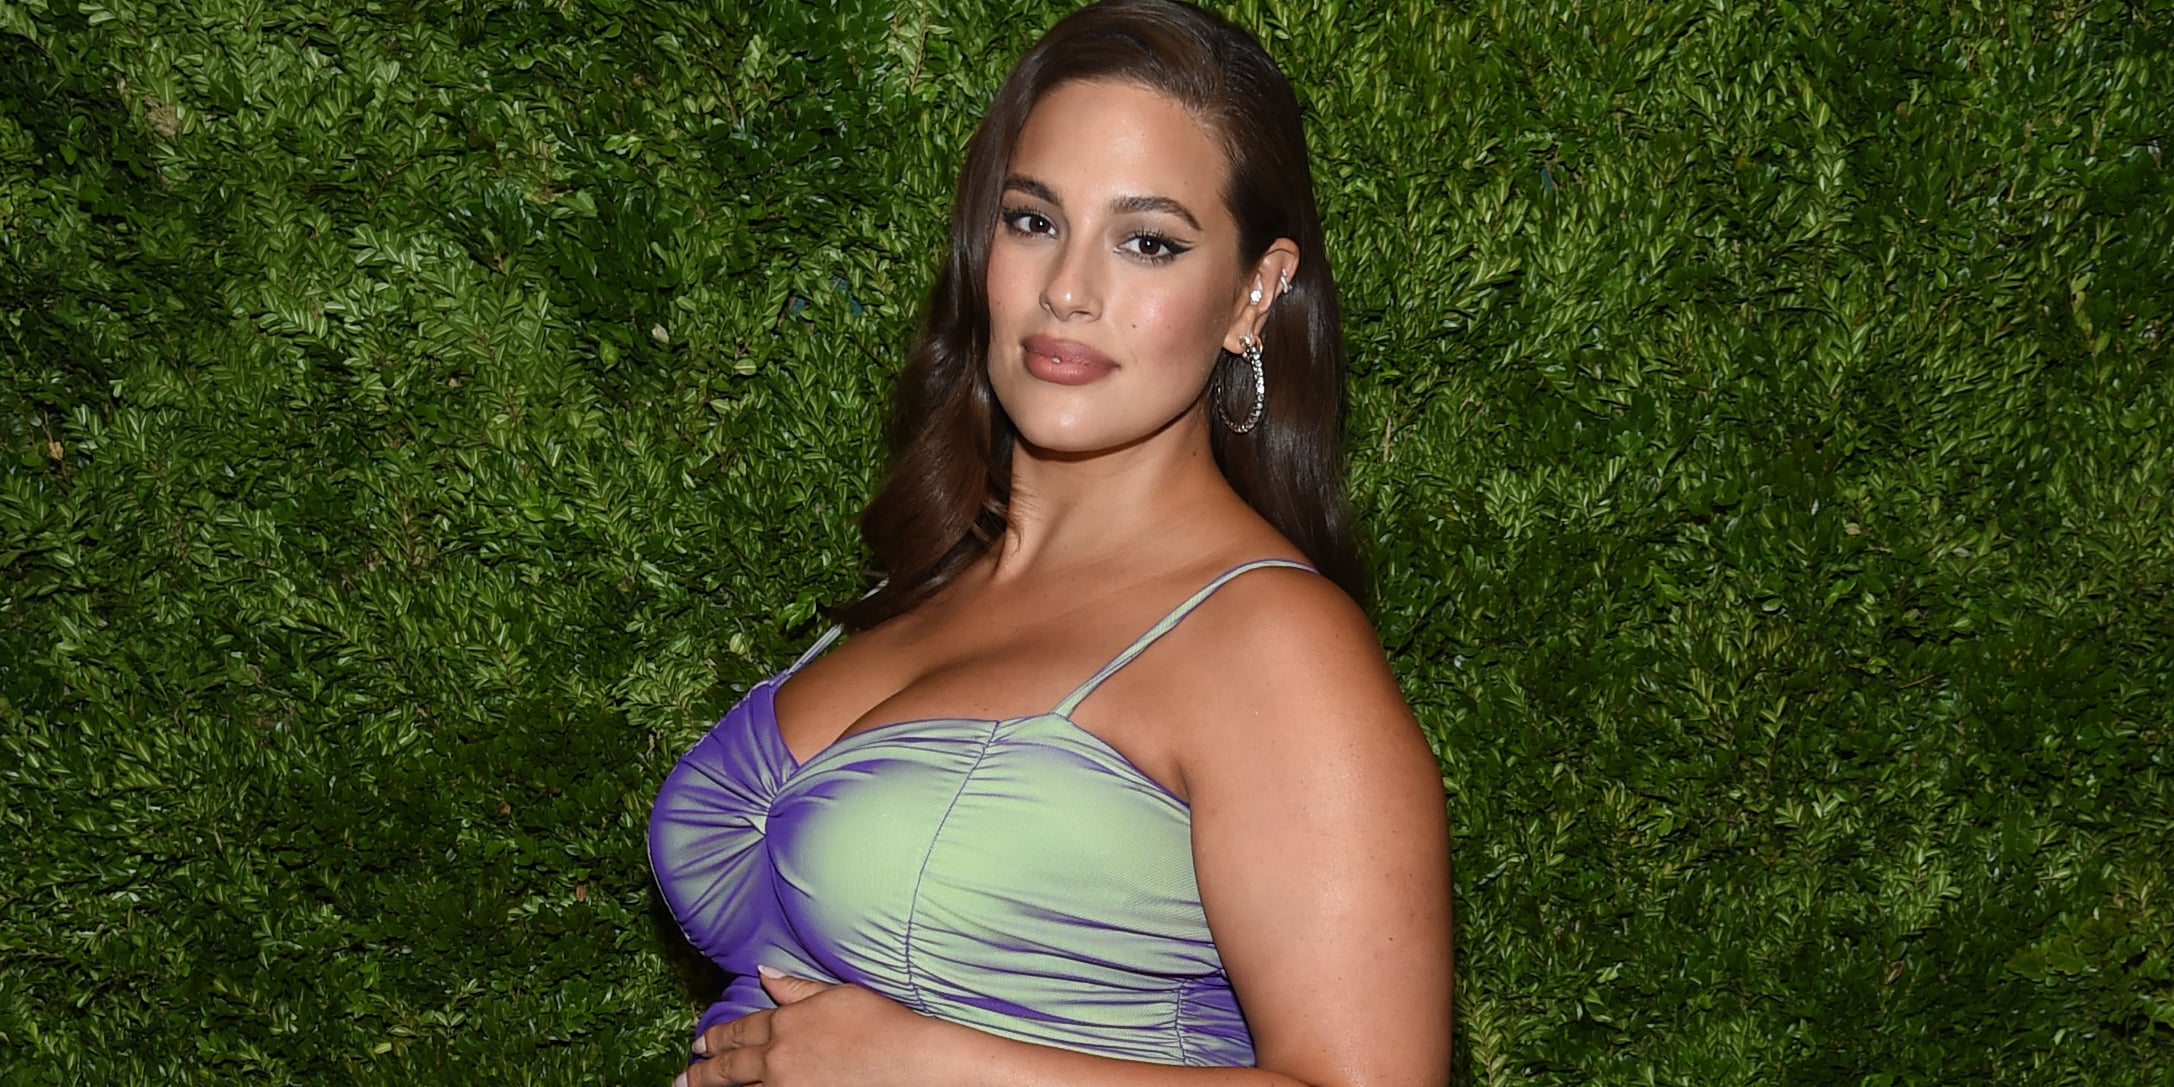 Ashley Graham is expecting her first child!